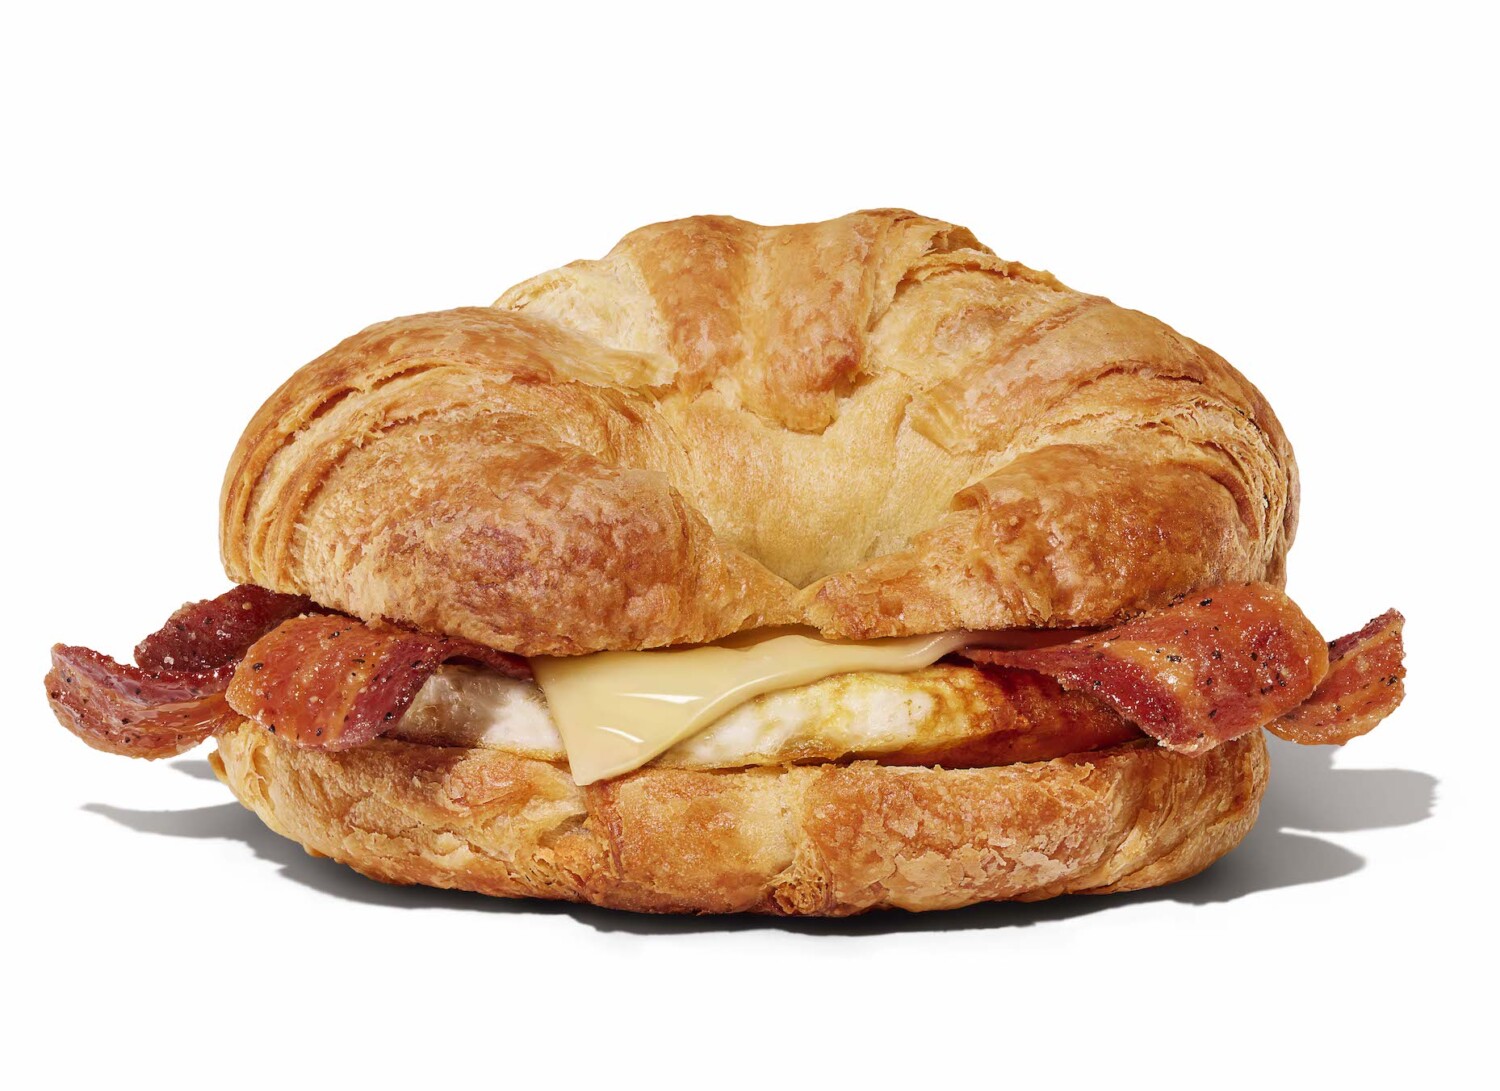 Maple sugar bacon croissant from Dunkin'